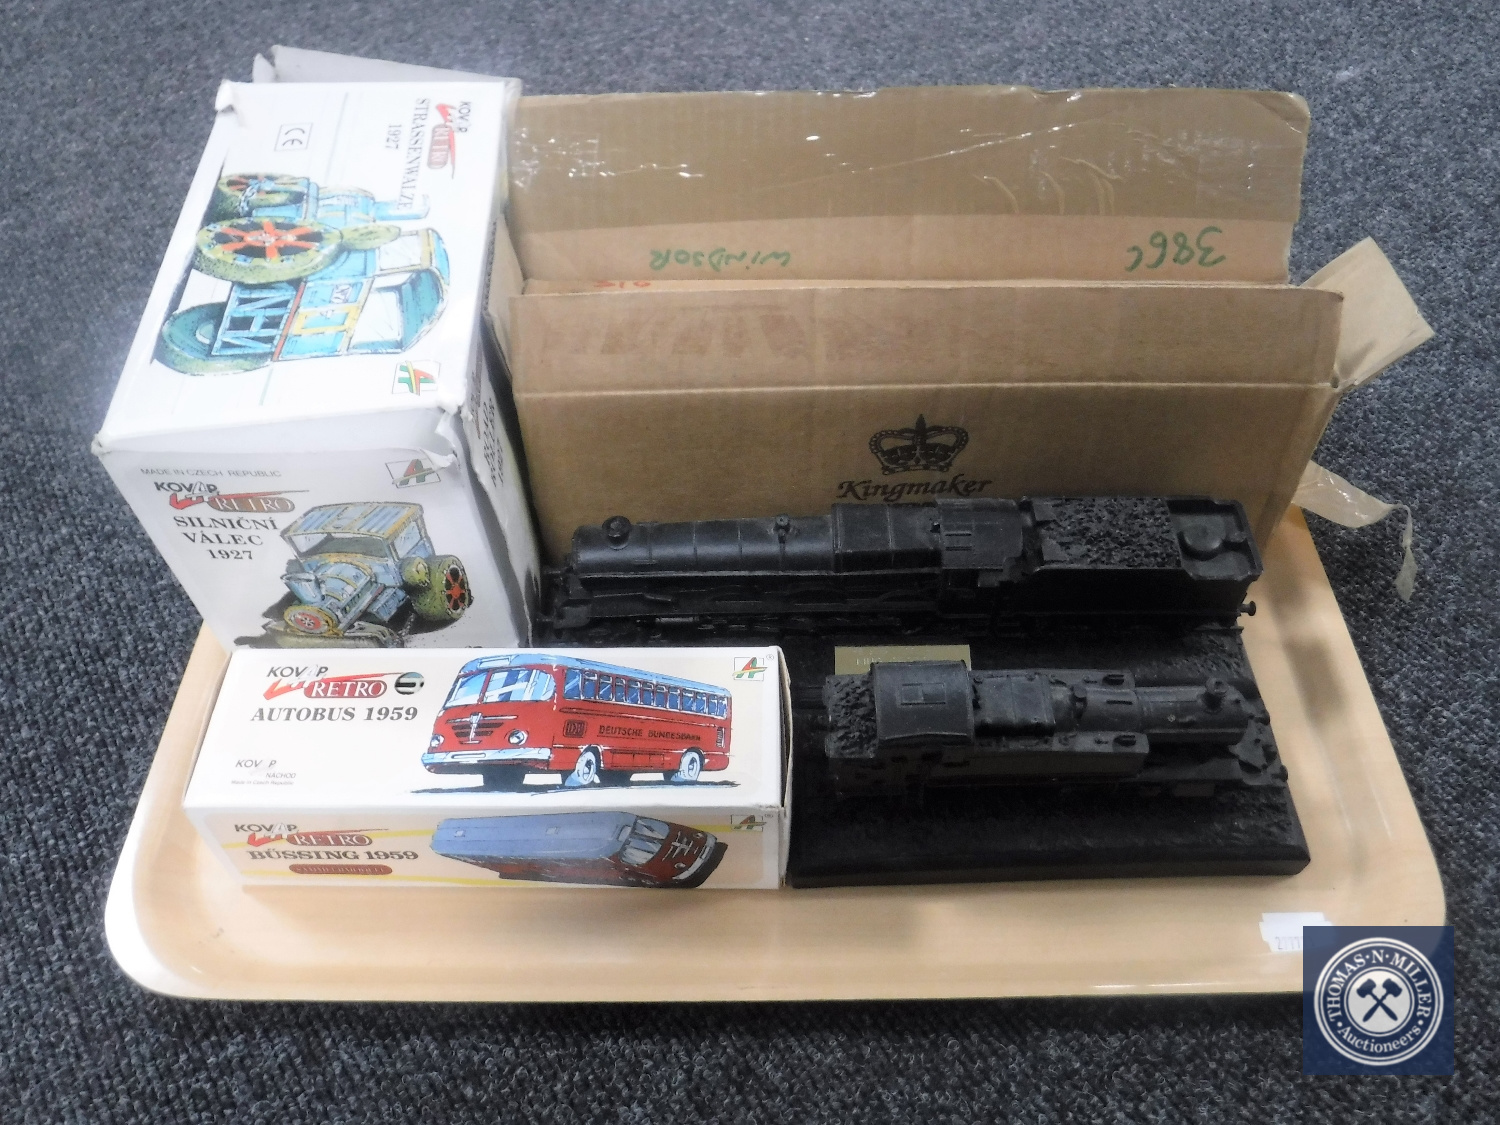 A tray containing four Kingmaker scale model trains together with a boxed Kovap retro bus and a